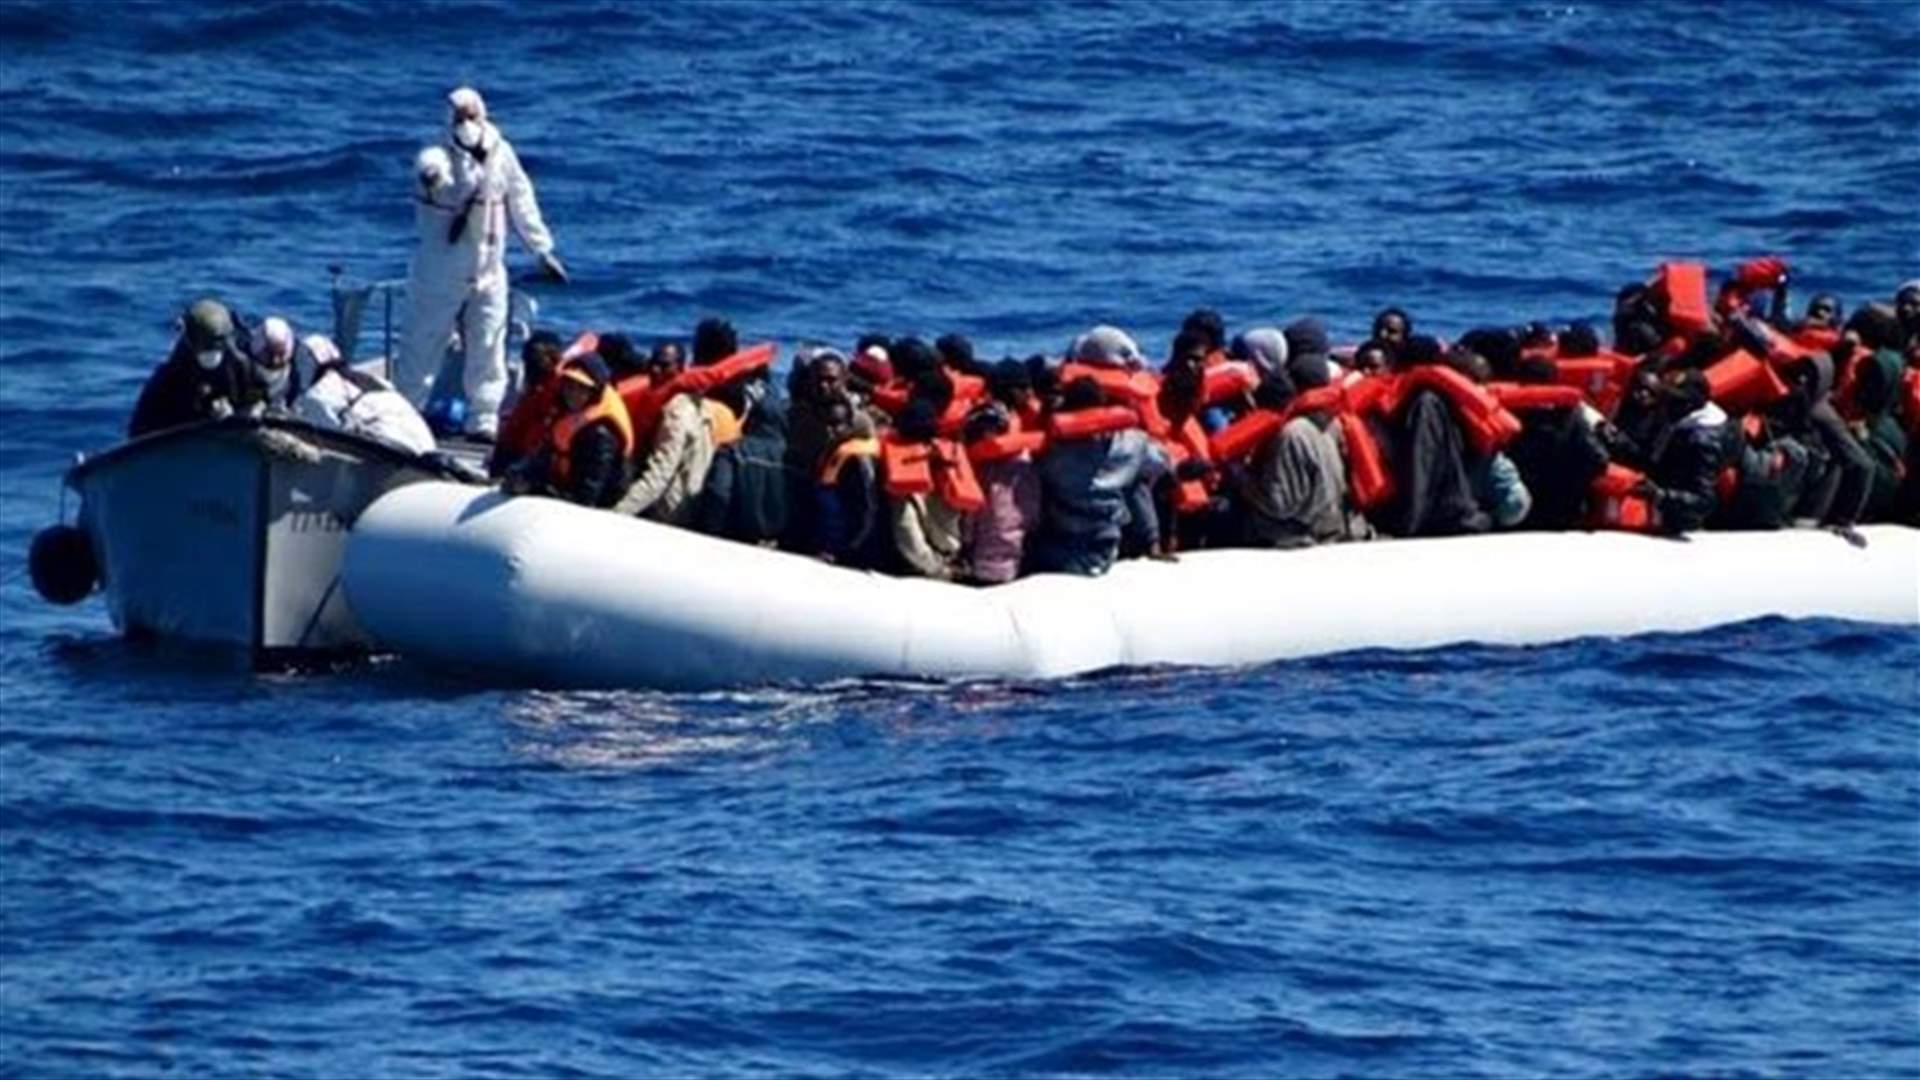 Almost 500 migrants reach Italy, more deaths reported at sea